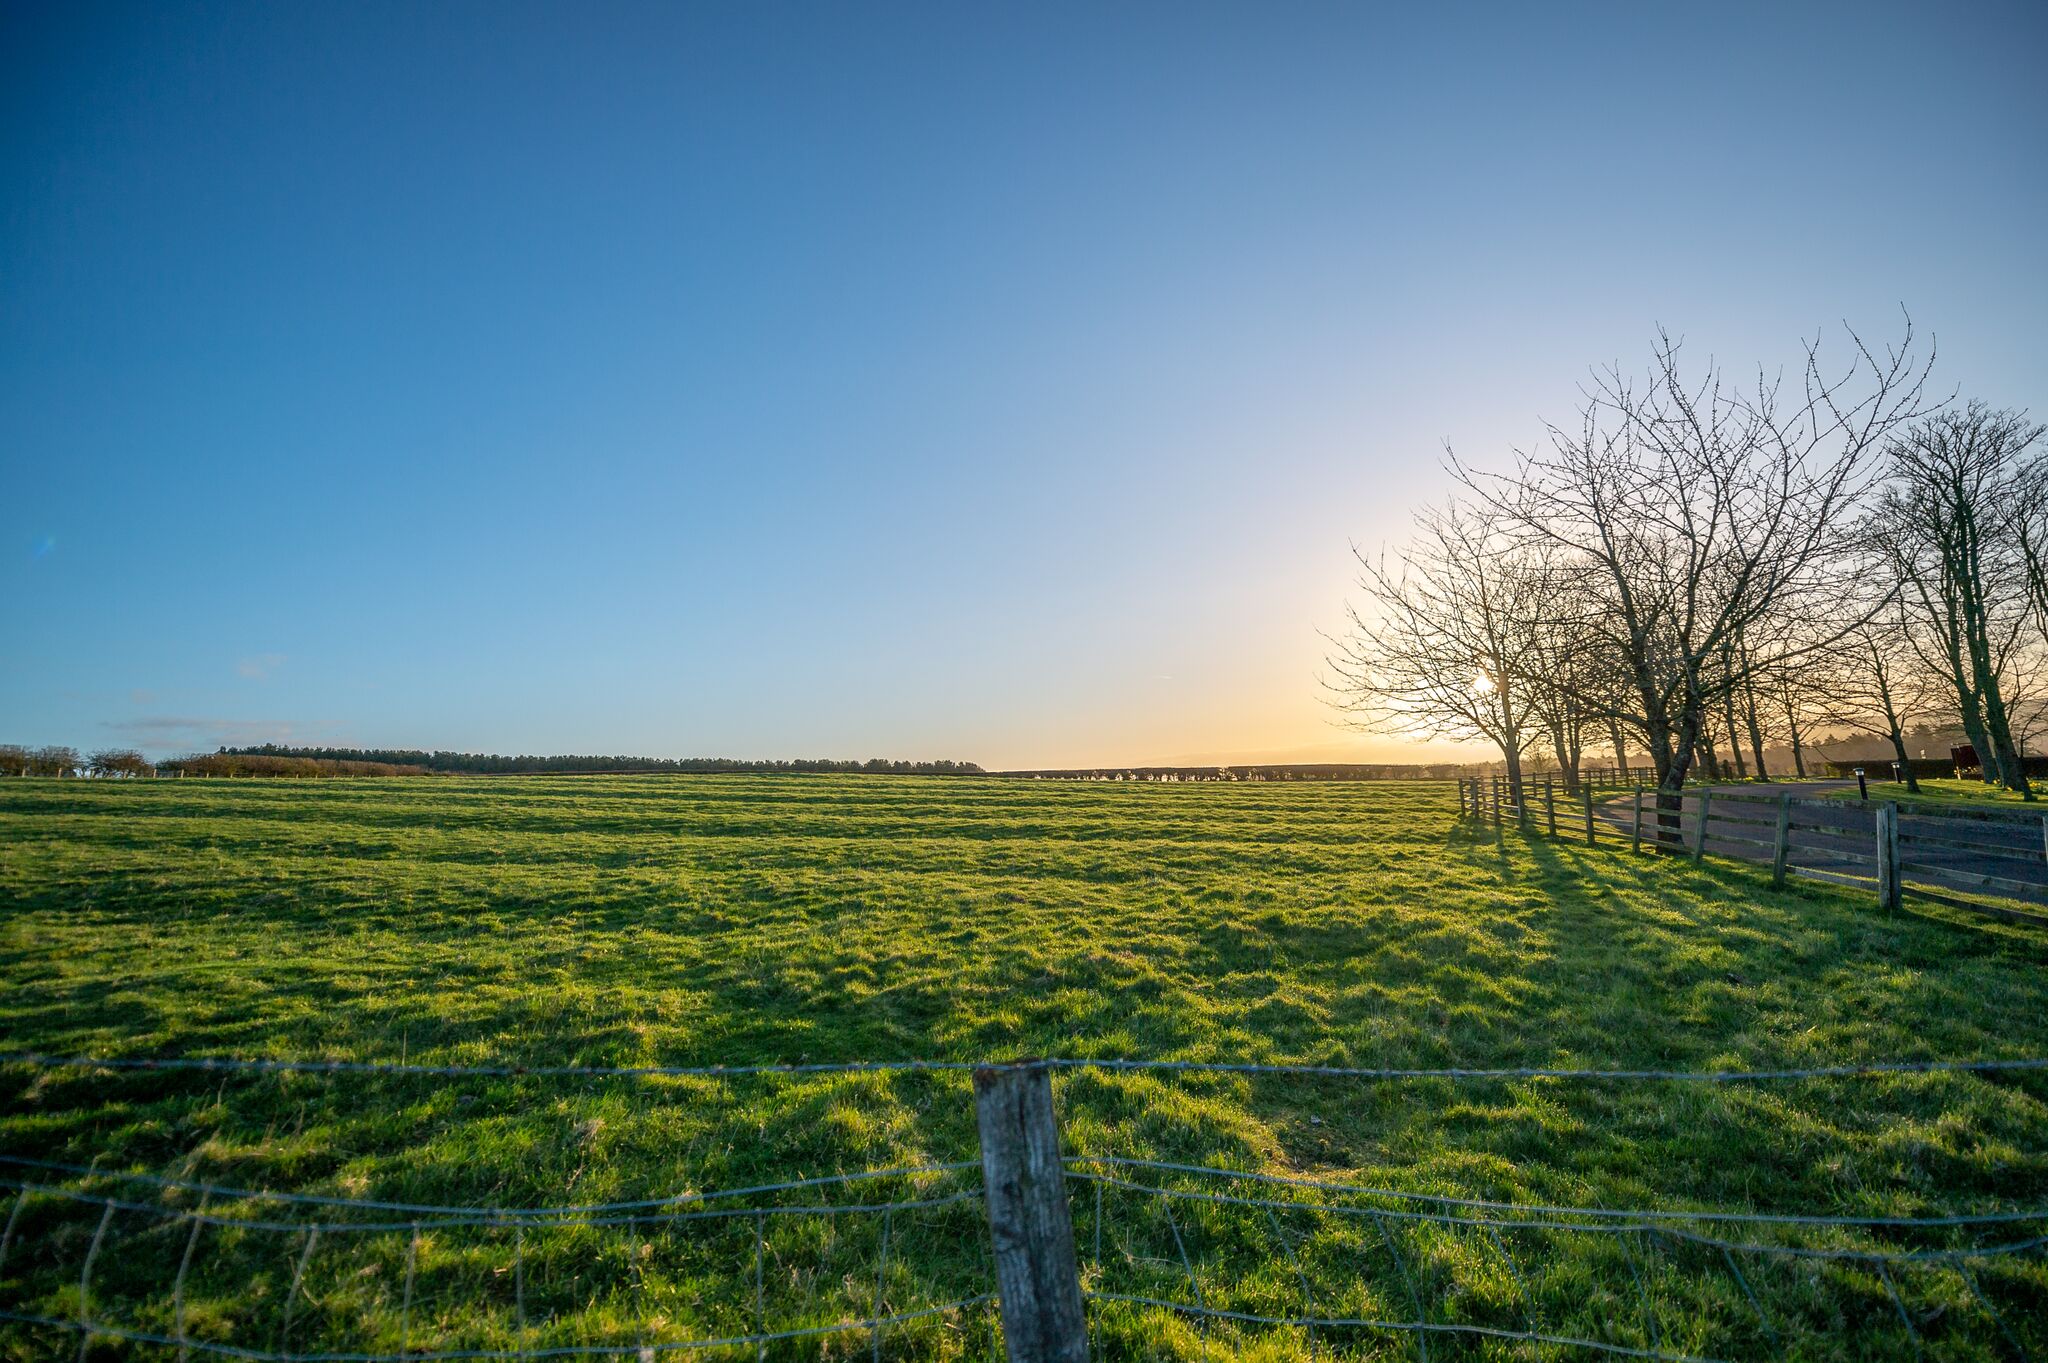 Field at sunrise with trees and a fence to the right and clear blue sky